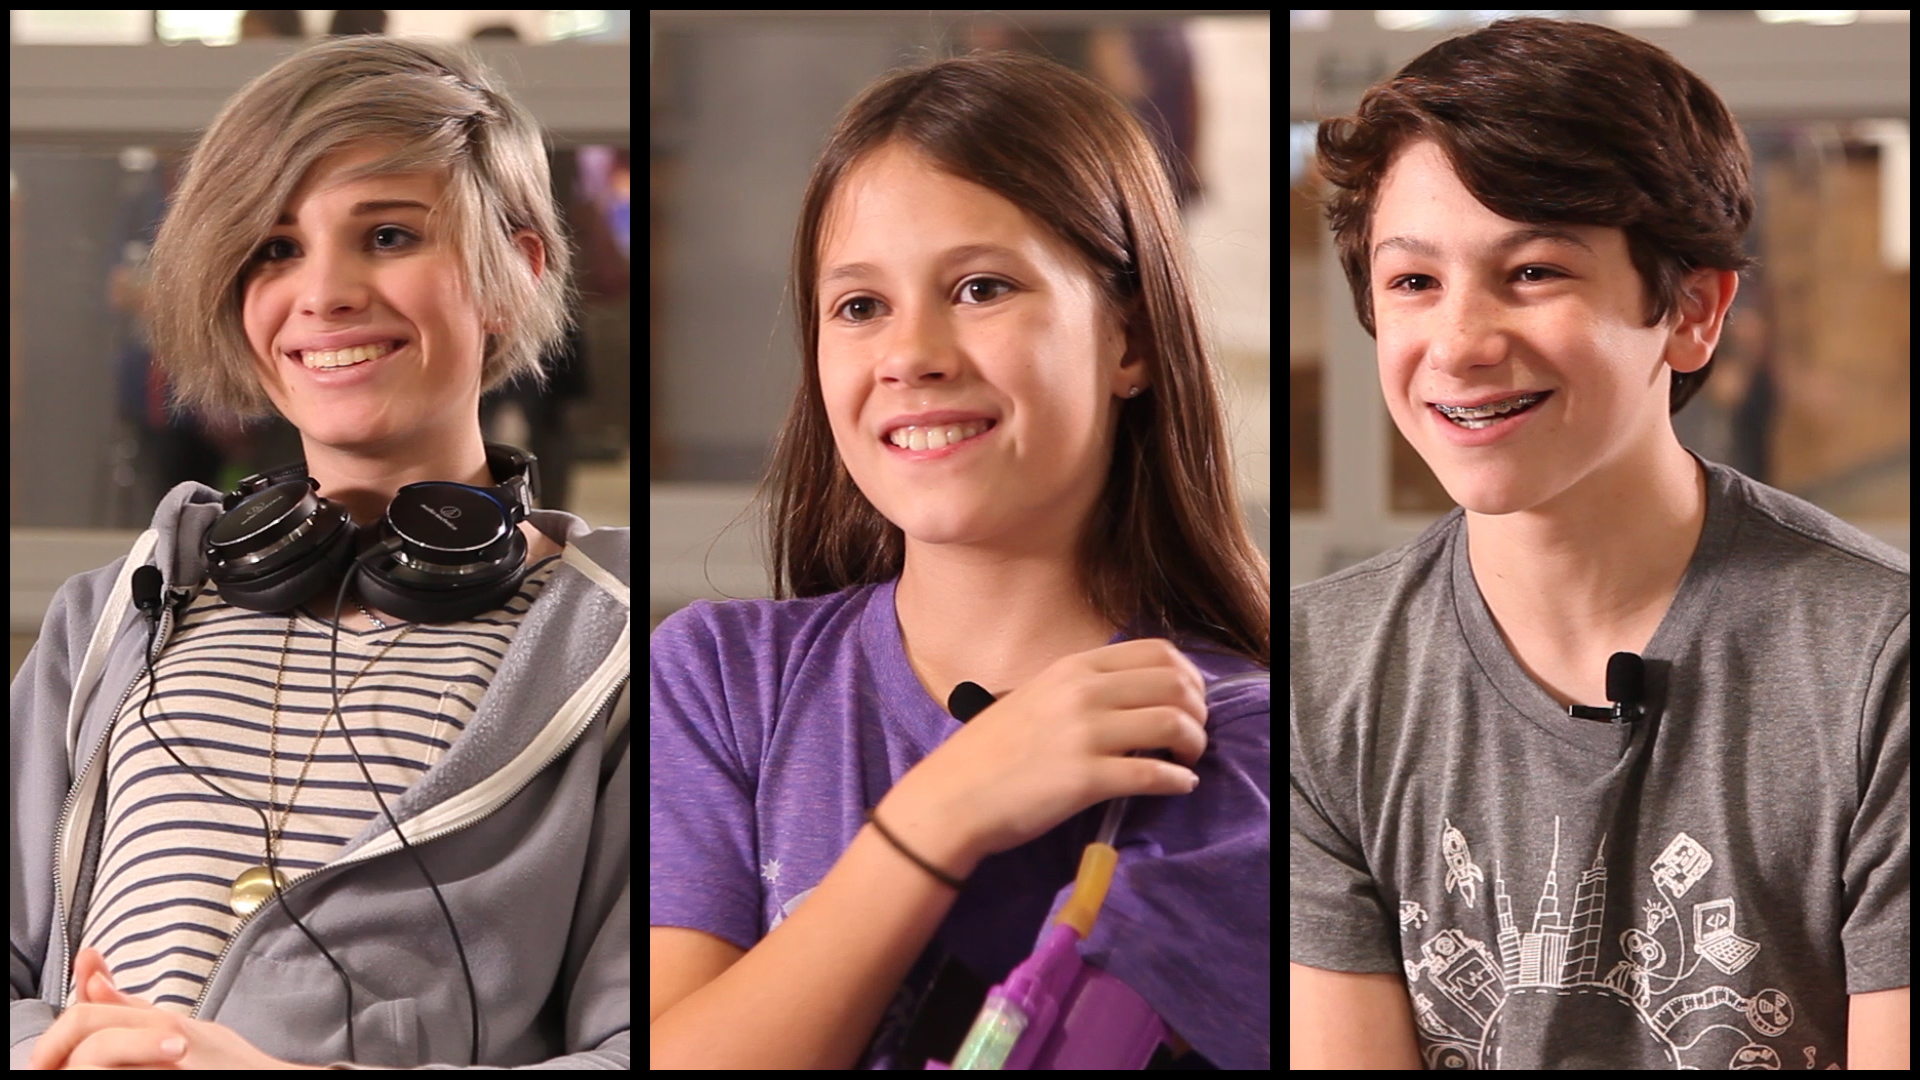 Three (very) young inventors using 3D printing to change the world